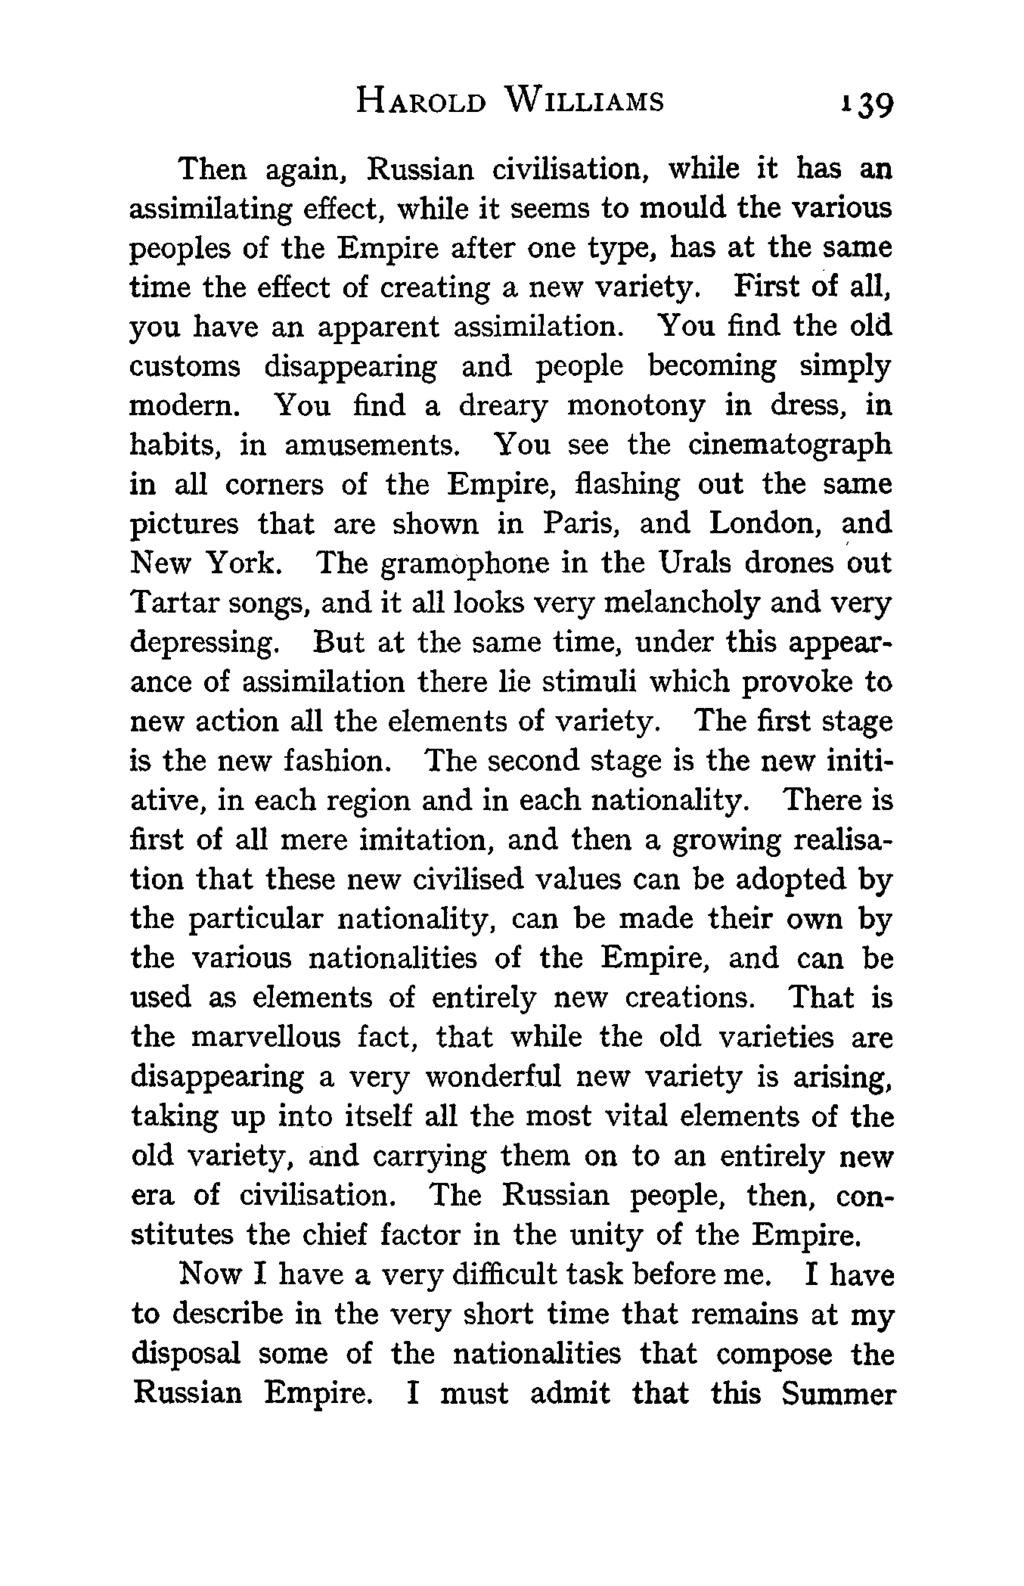 HAROLD WILLIAMS 139 Then again, Russian civilisation, while it has an assimilating effect, while it seems to mould the various peoples of the Empire after one type, has at the same time the effect of